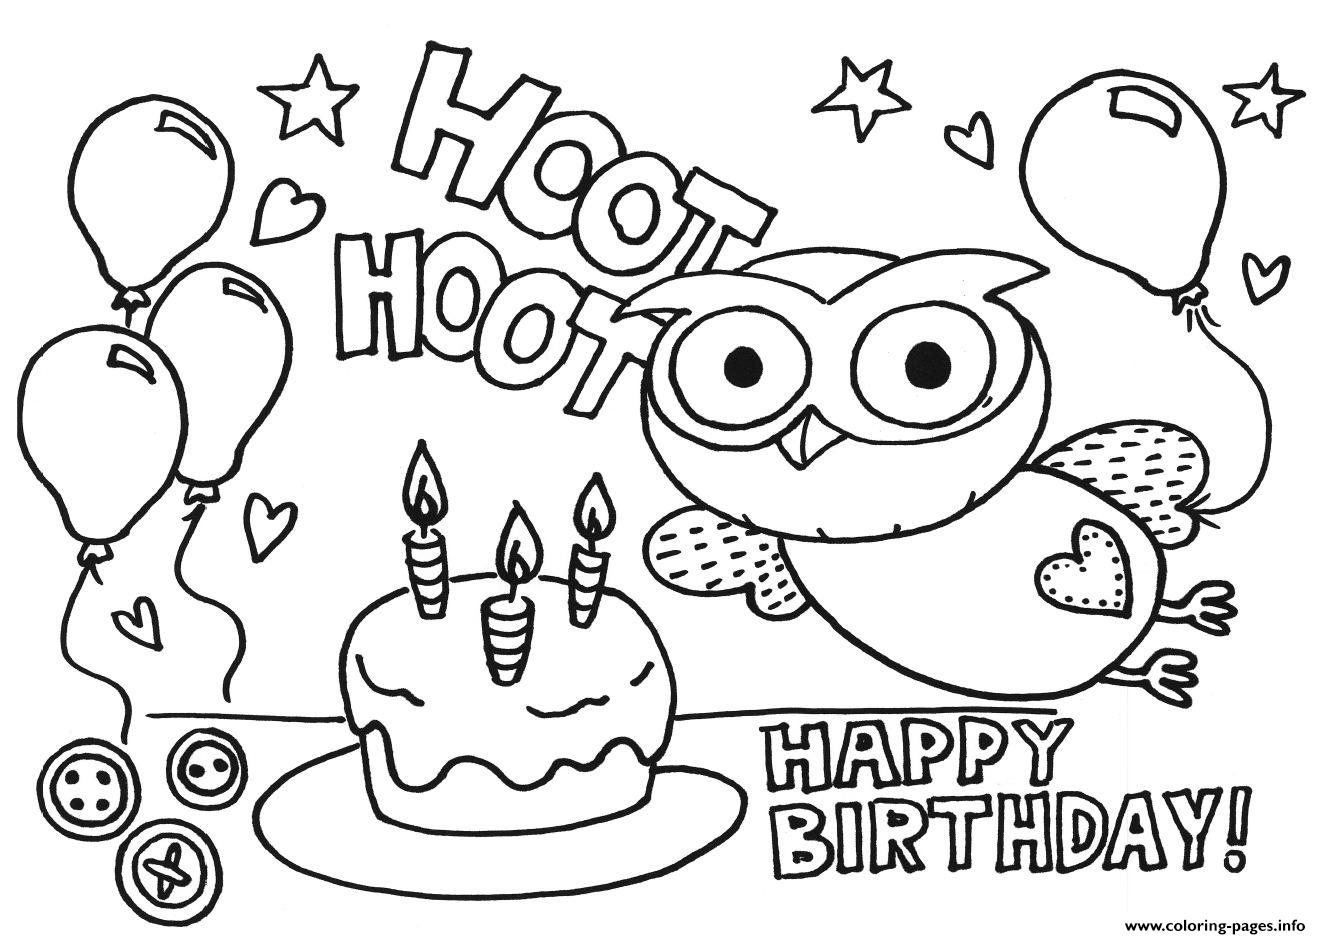 Happy Birthday  Gigle Hoot Hoot09bc coloring